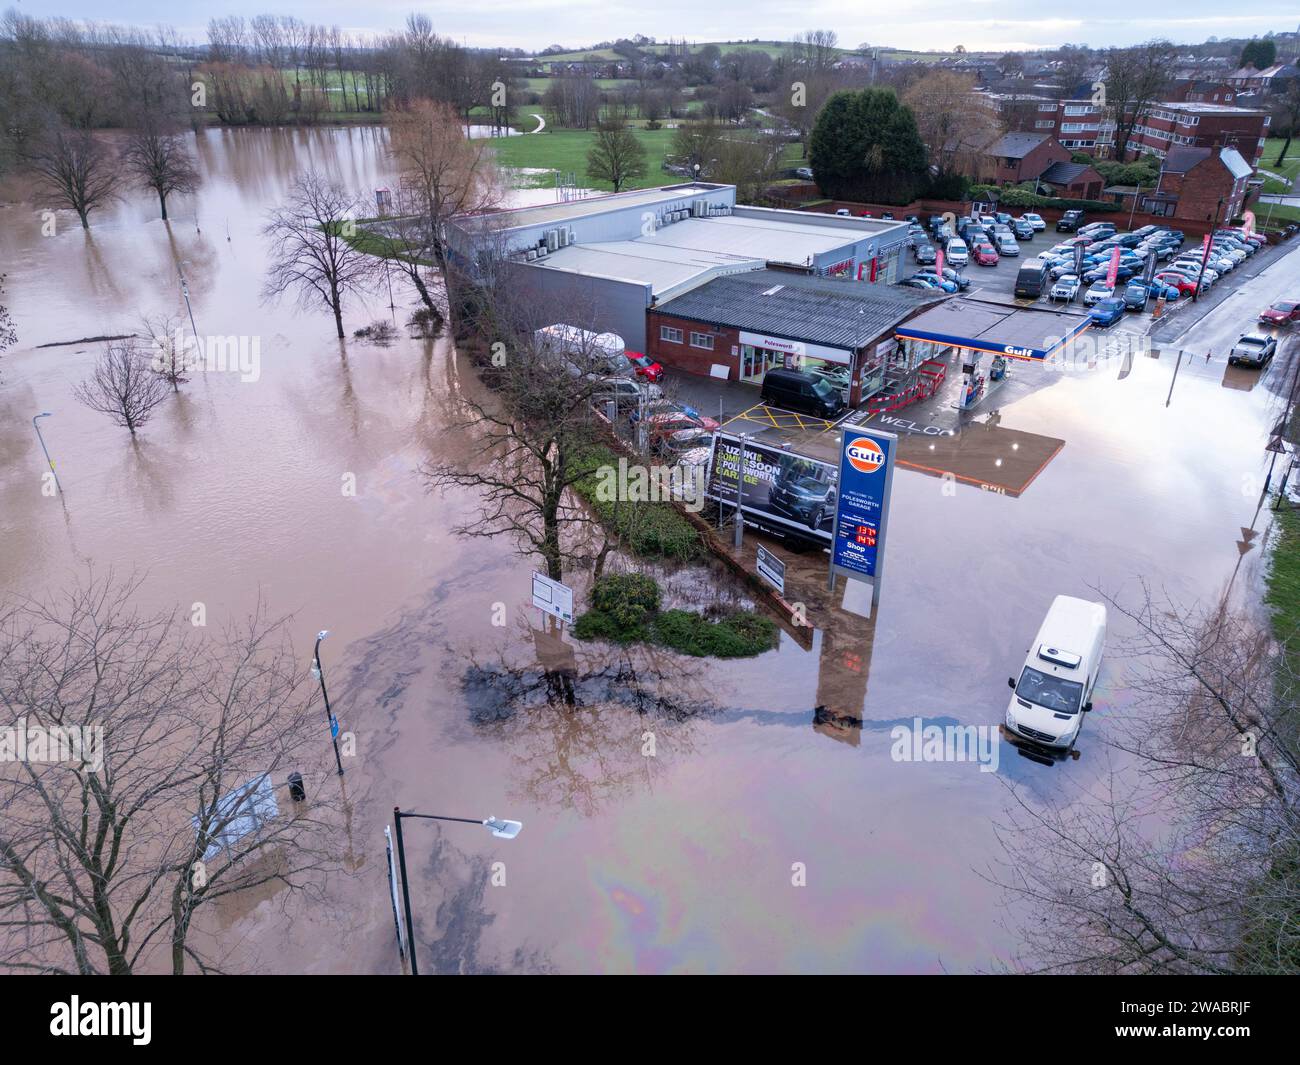 At the start of 2024 Storm Henk saw large parts of the Midlands under water after severe flooding. Pictured, A stranded vehicle leaks oil into the nearby River Anker in the village of Polesworth, North Warwickshire where vehicles had become trapped in the deep water. Stock Photo